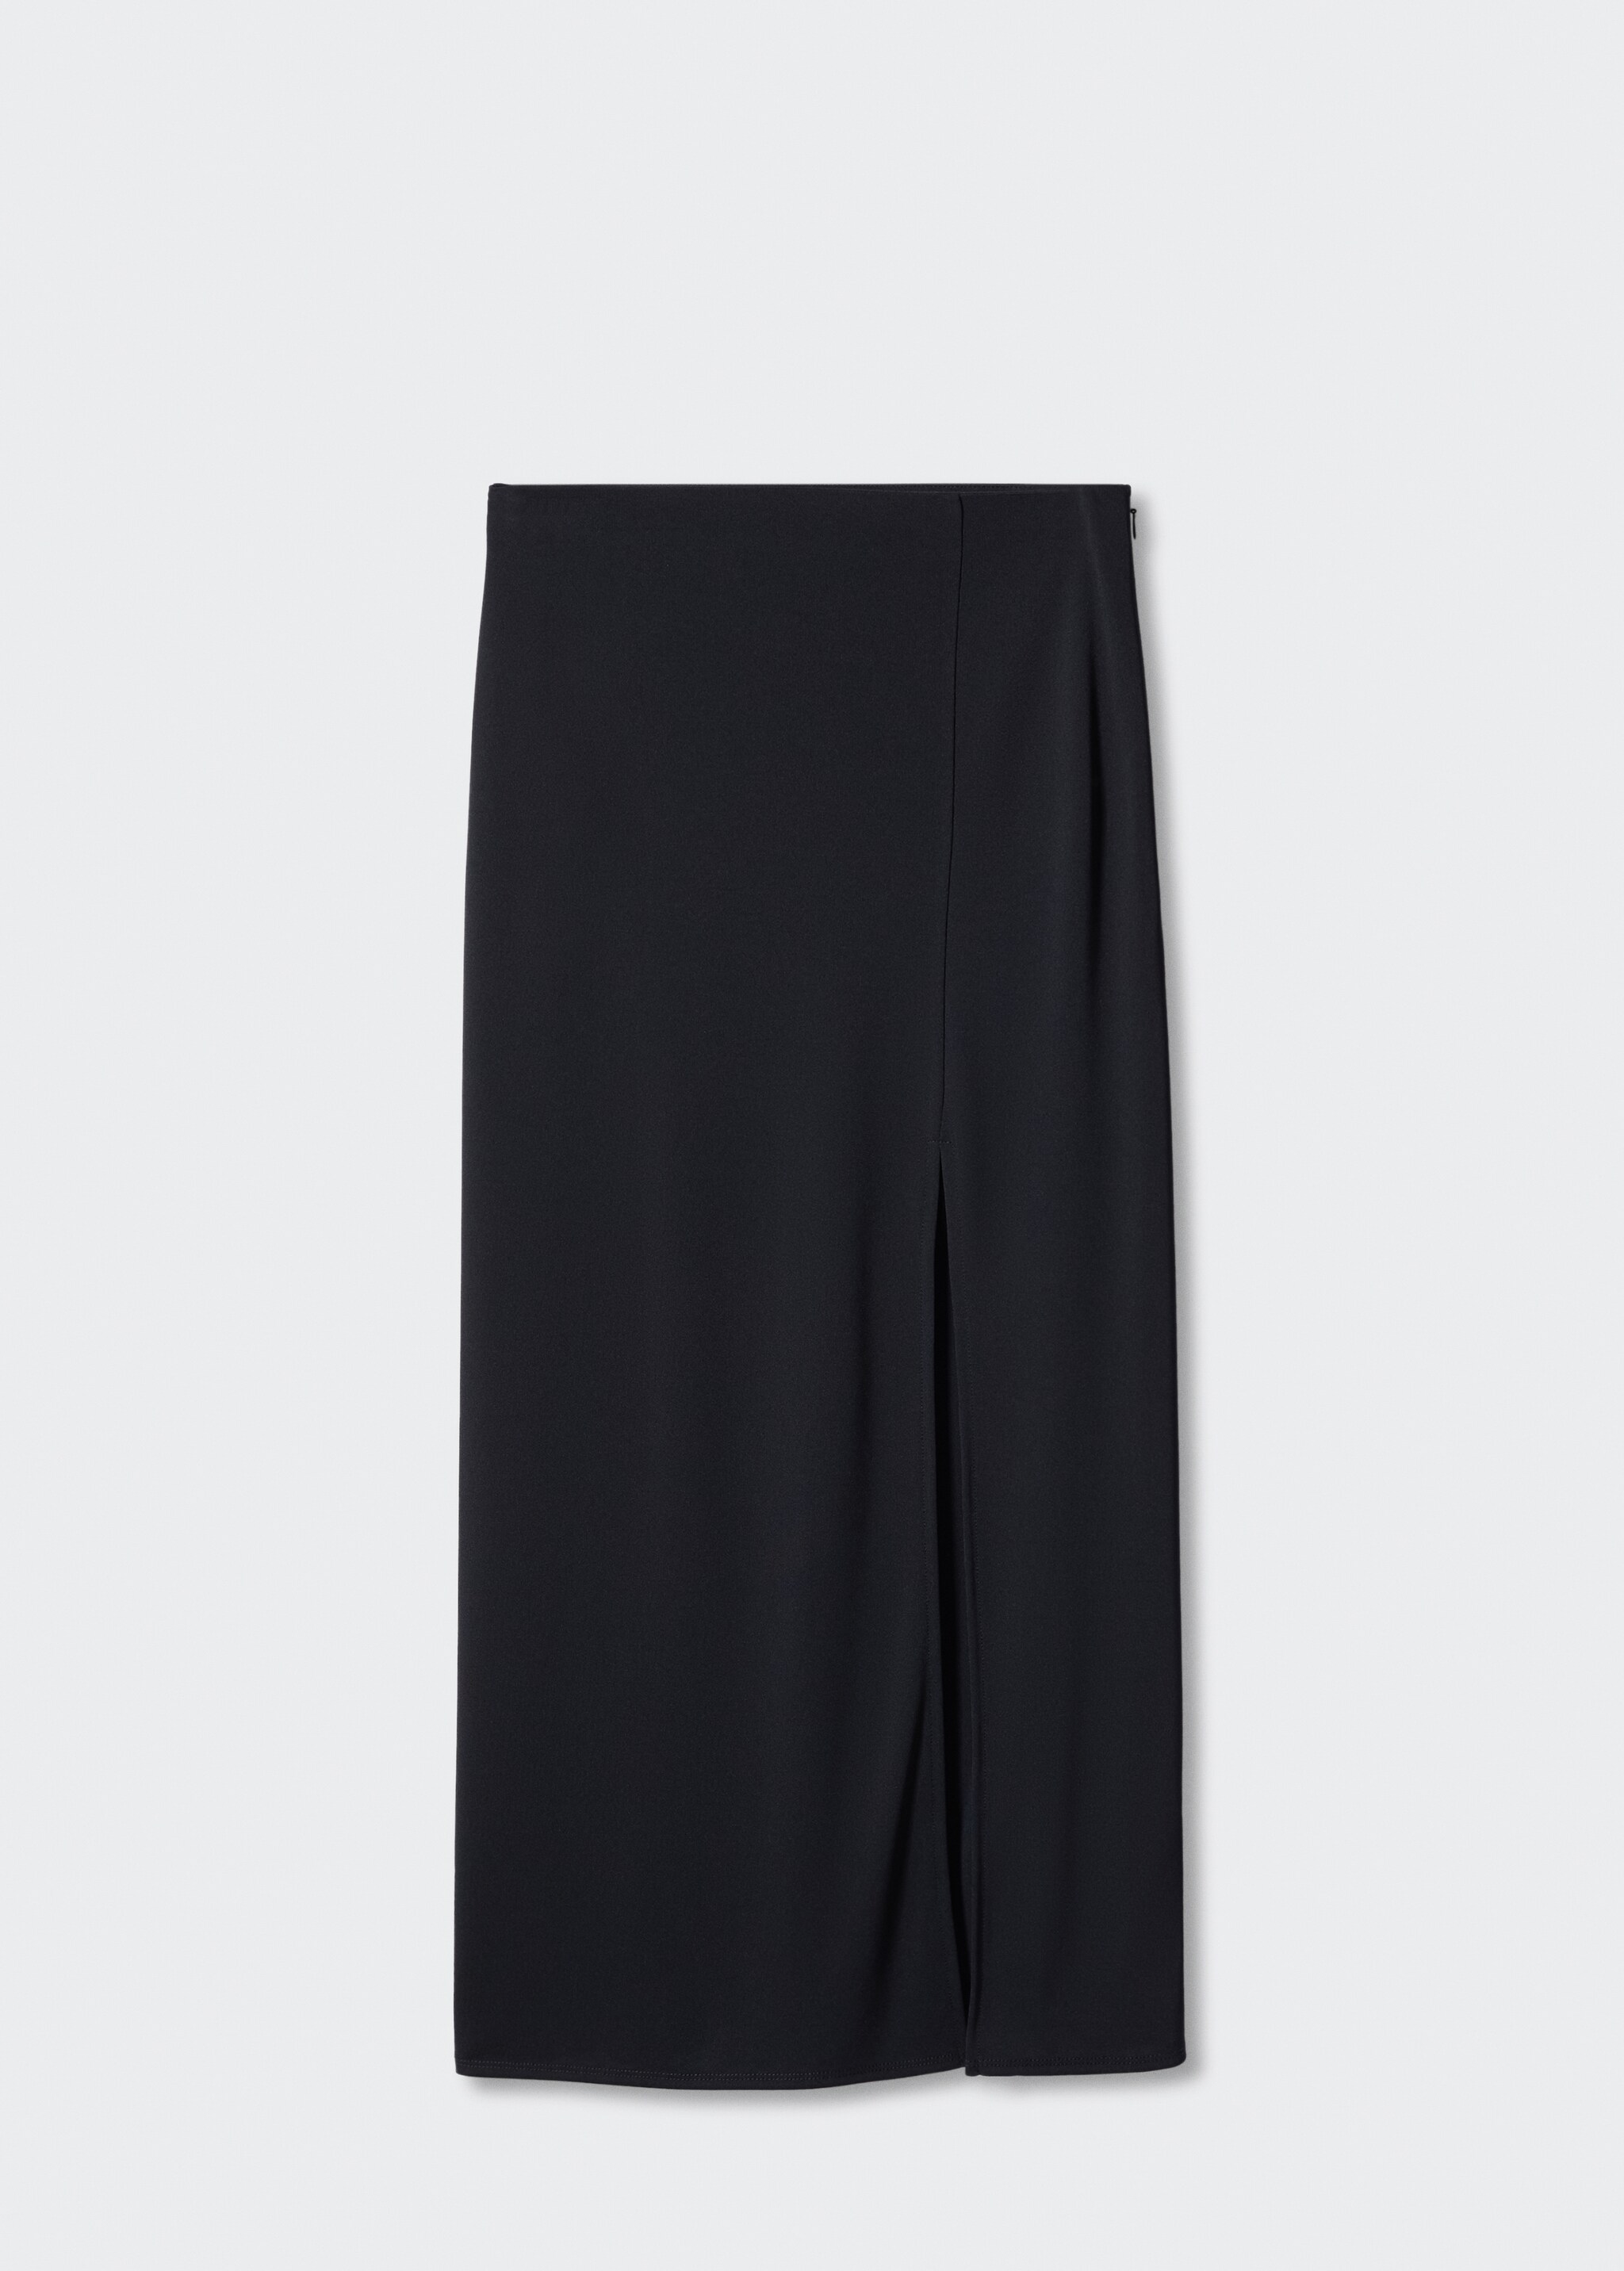 Vent midi skirt - Article without model